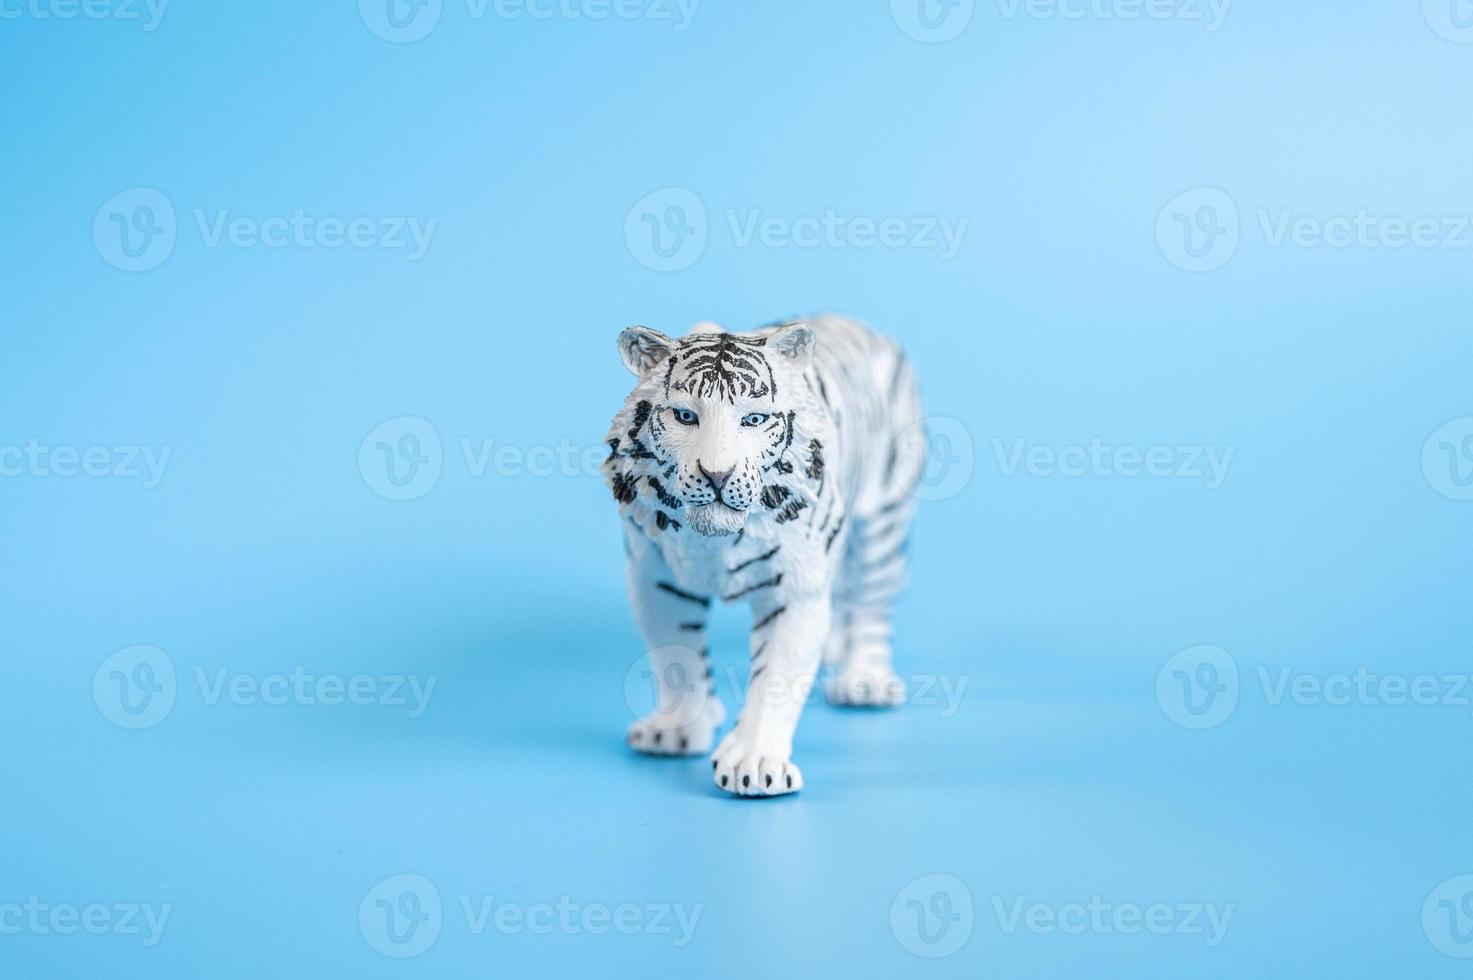 tiger figure toy photo